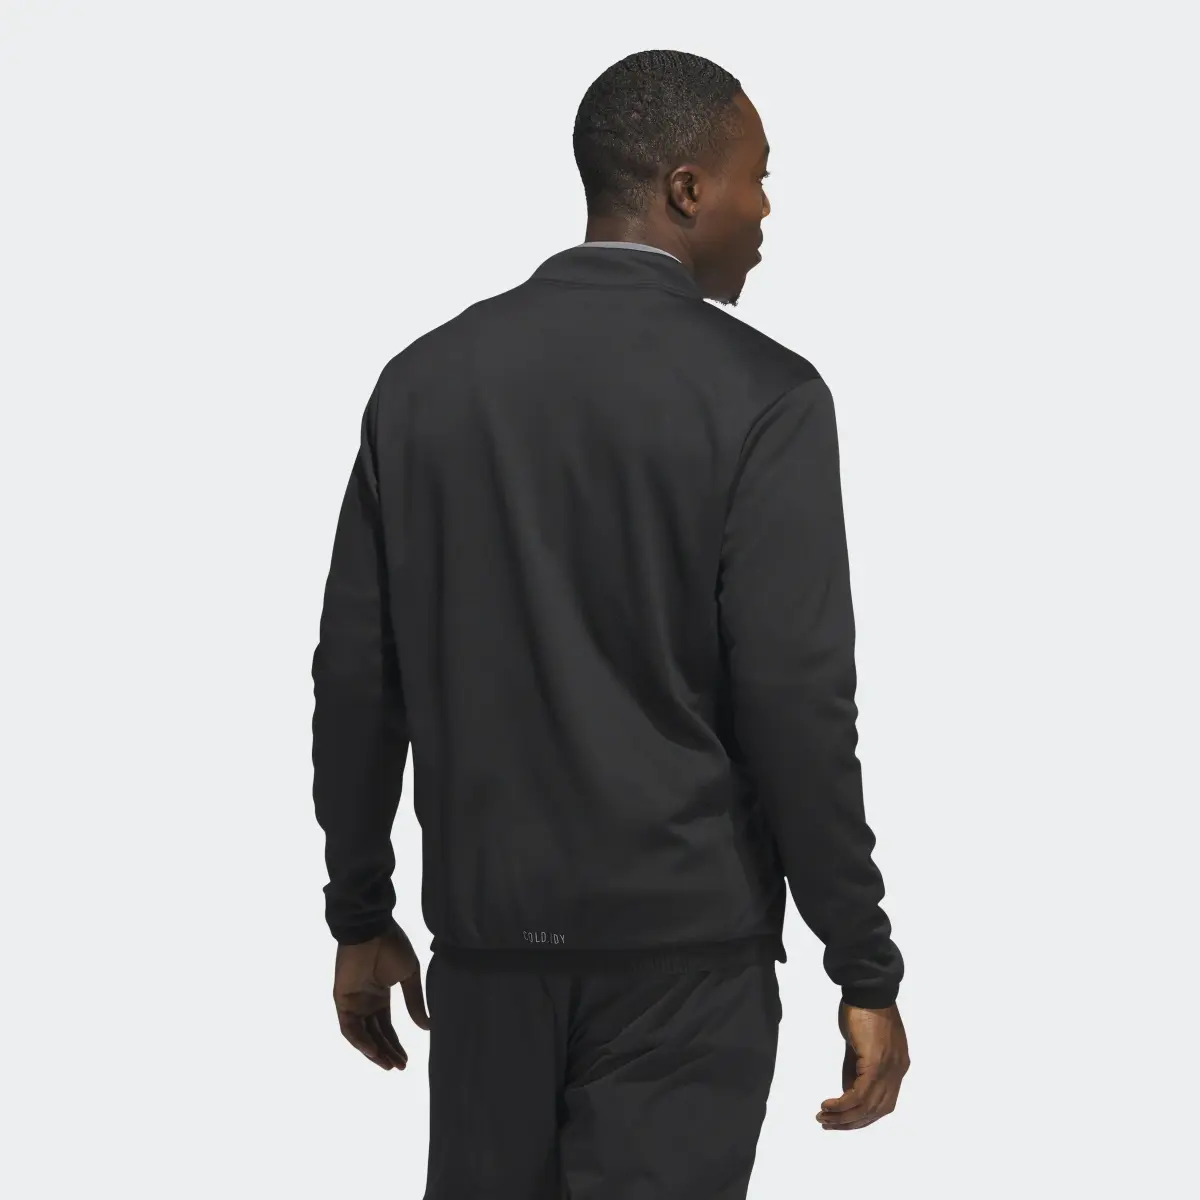 Adidas COLD.RDY Full-Zip Jacket. 3